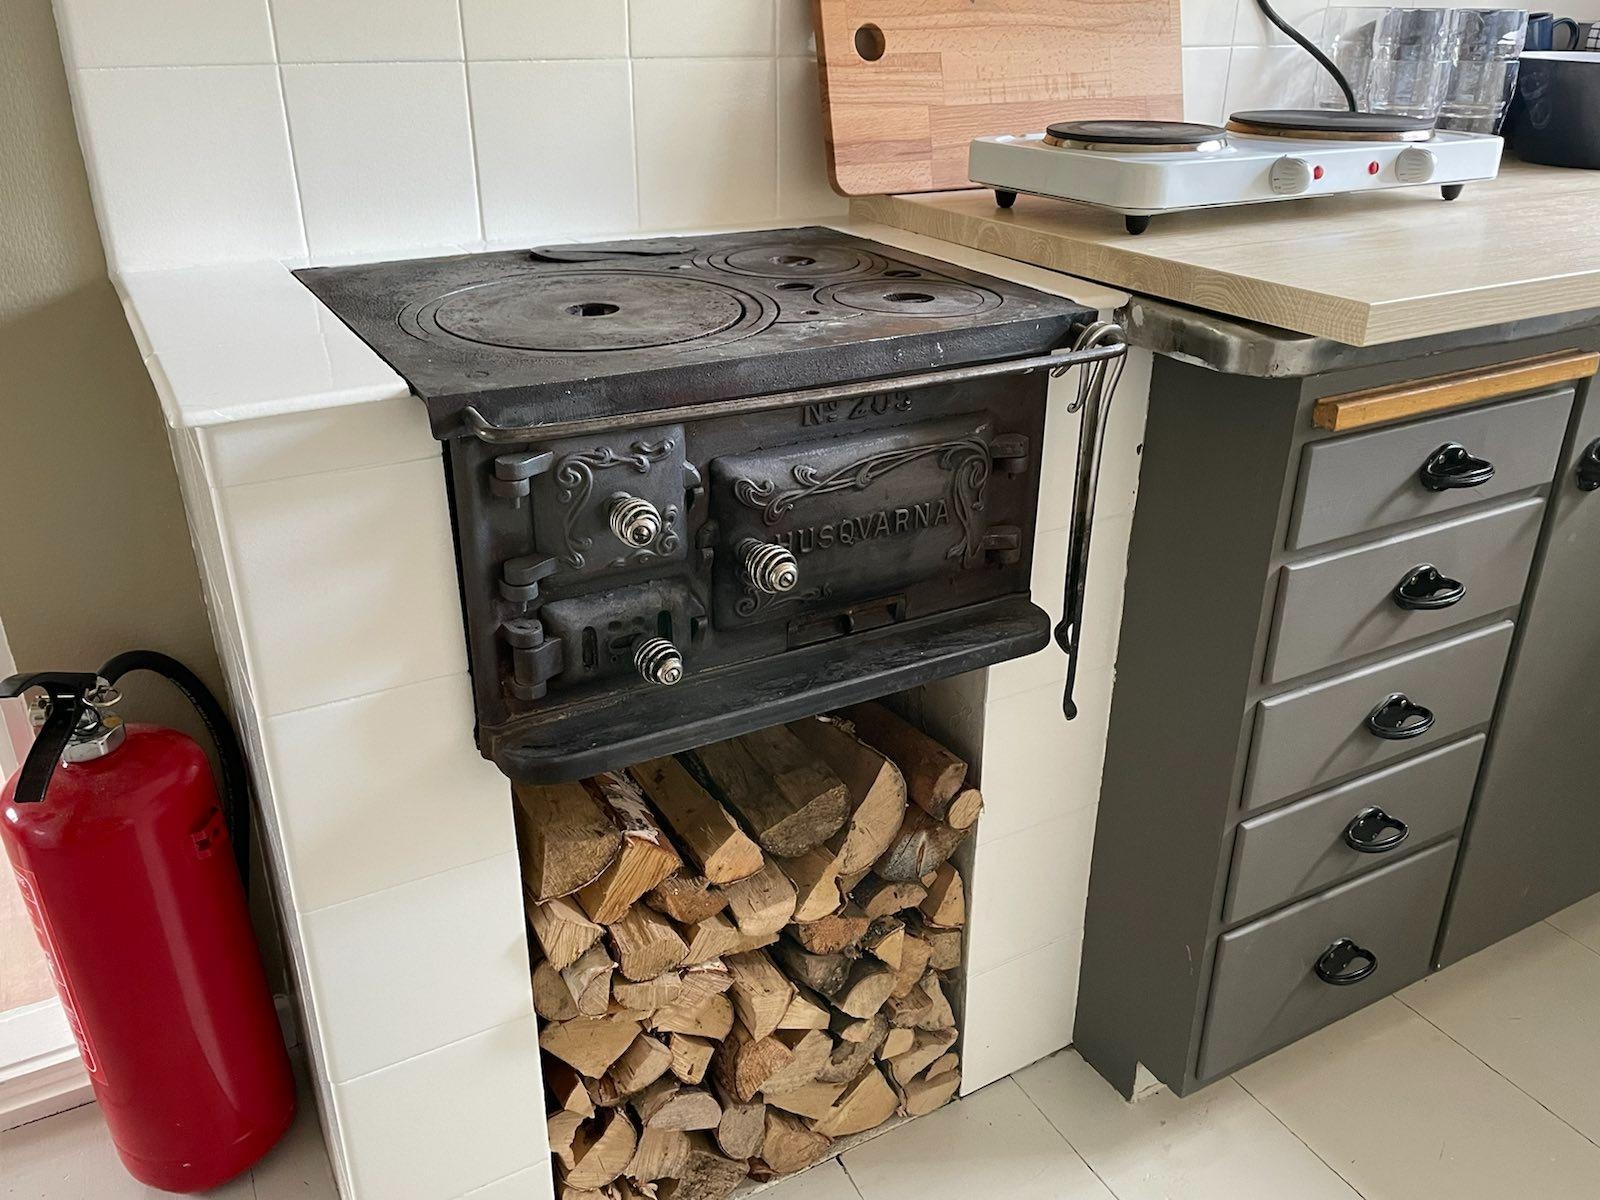 If you want, you can cook on the classical Swedish wood stove. There is plenty of wood available for you.